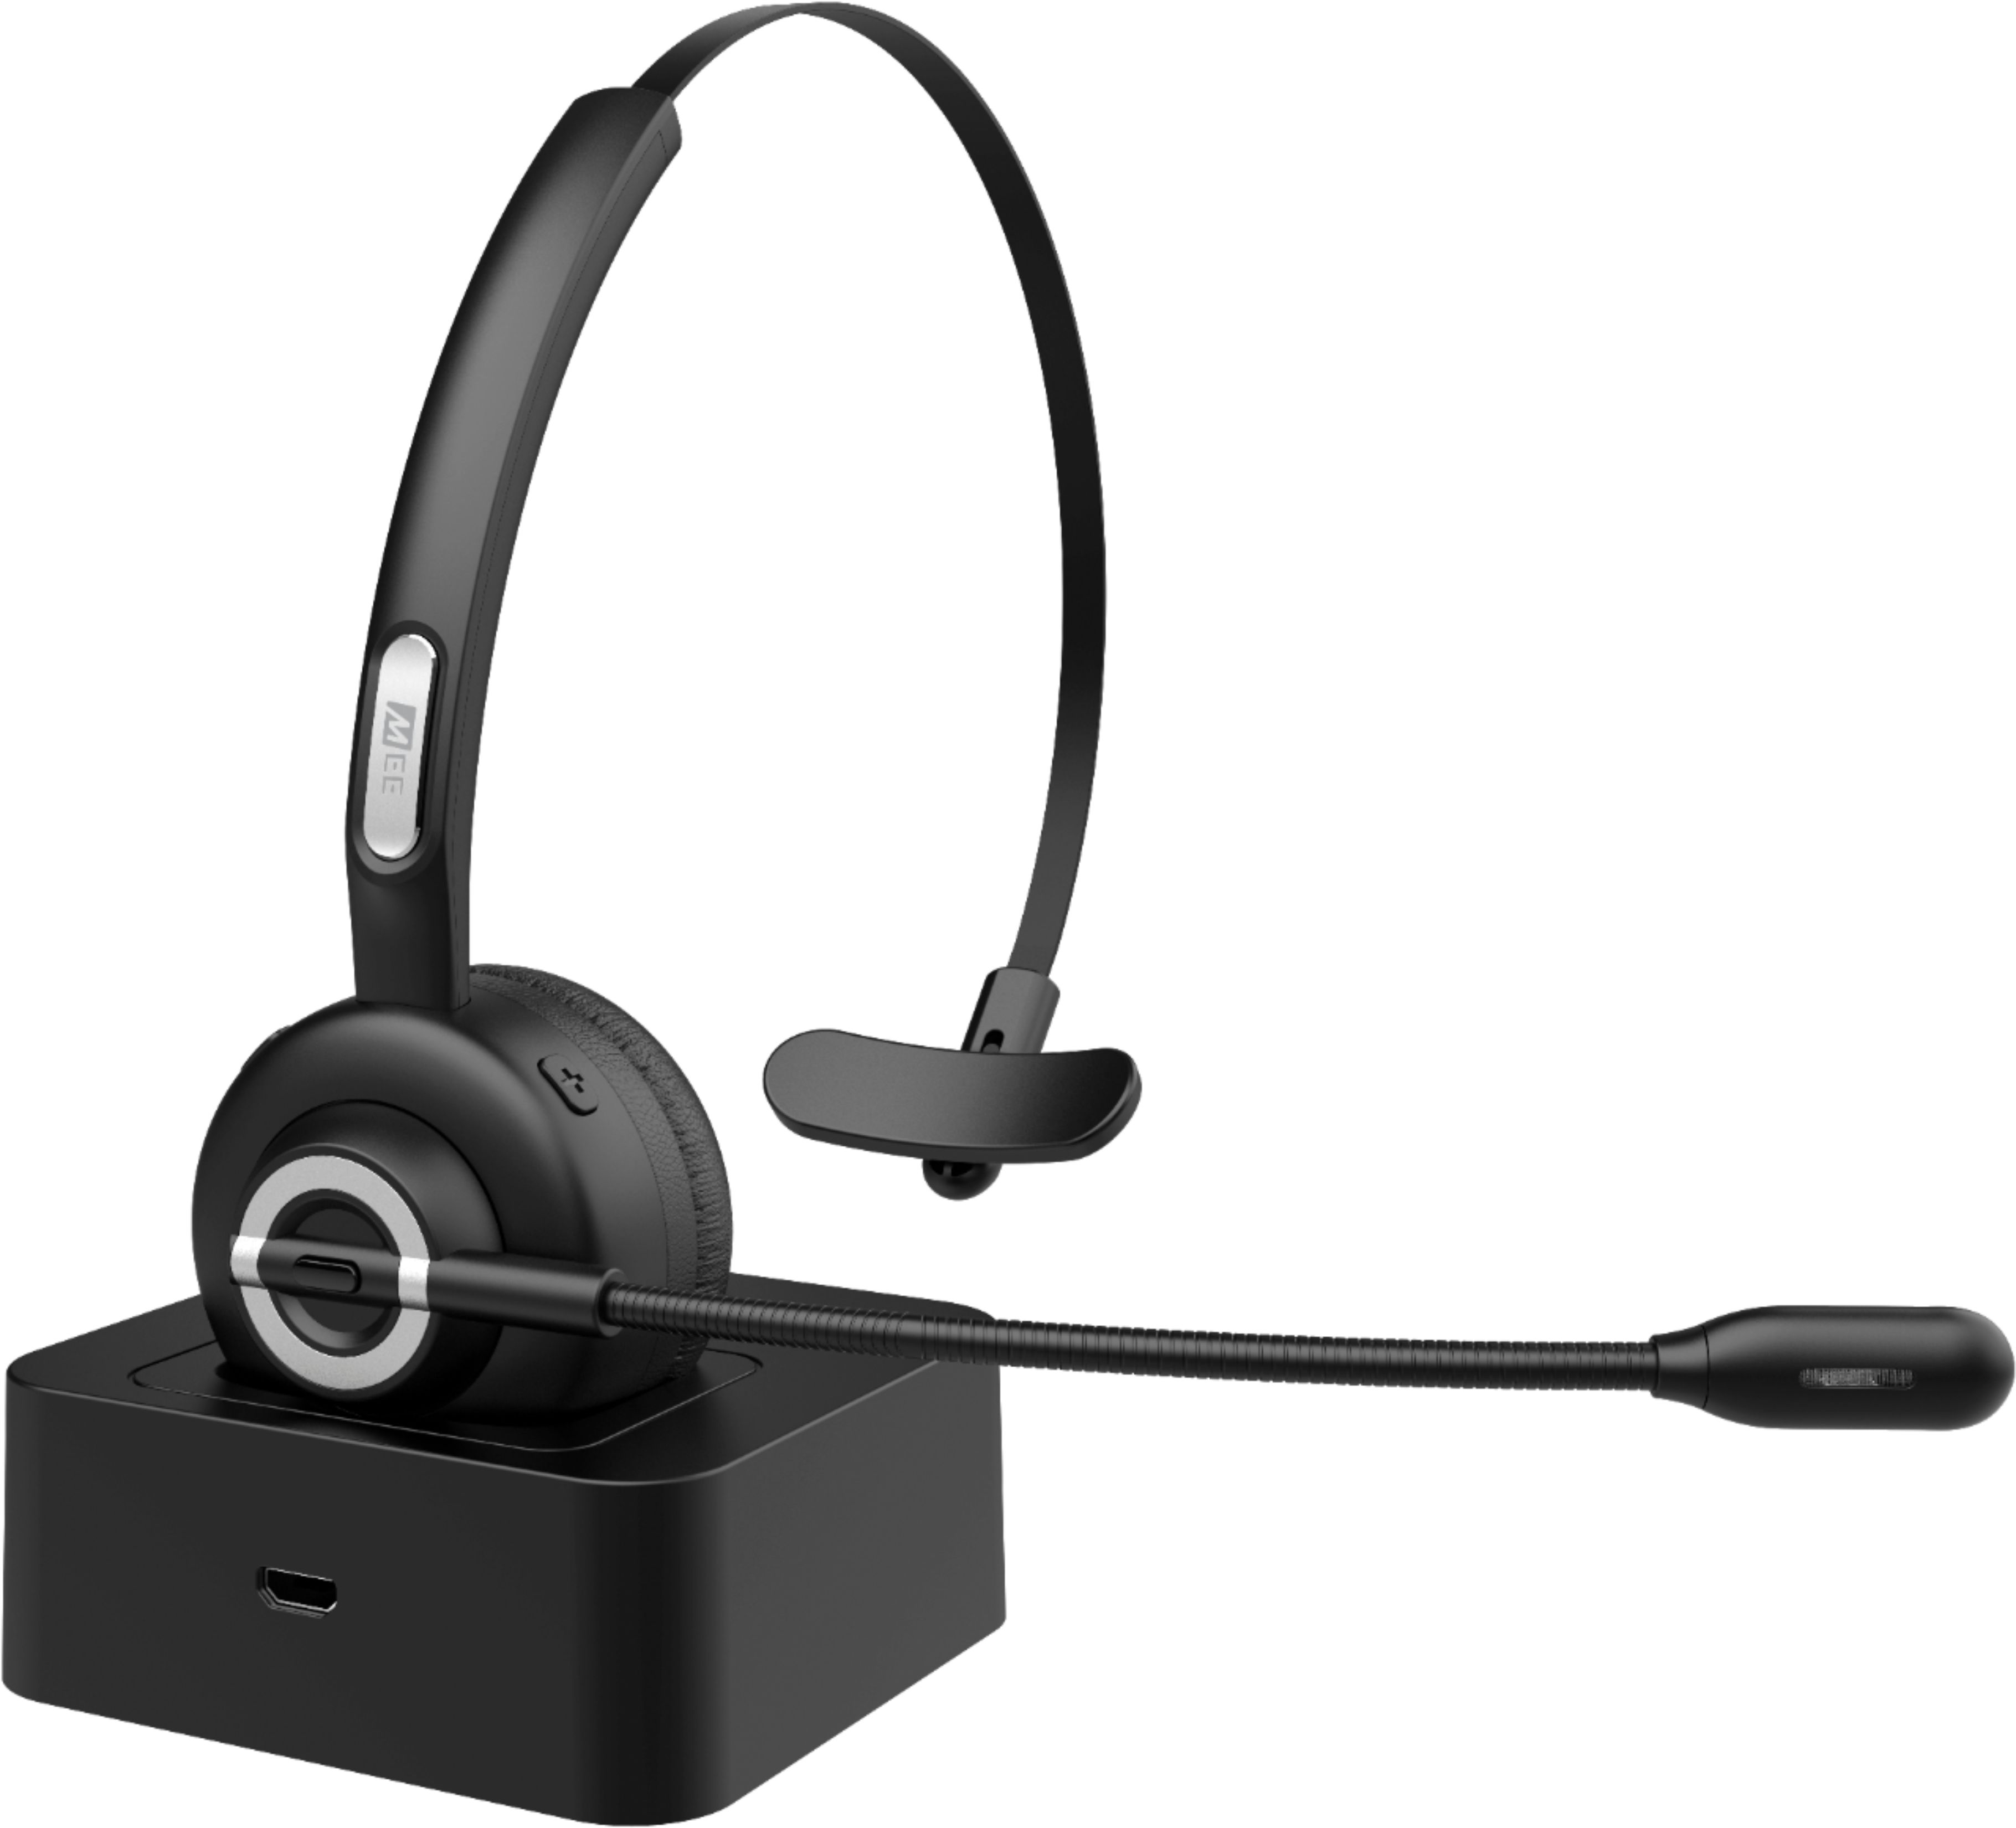 Angle View: MEE audio - Bluetooth Wireless Headset with Boom Microphone and Charging Dock